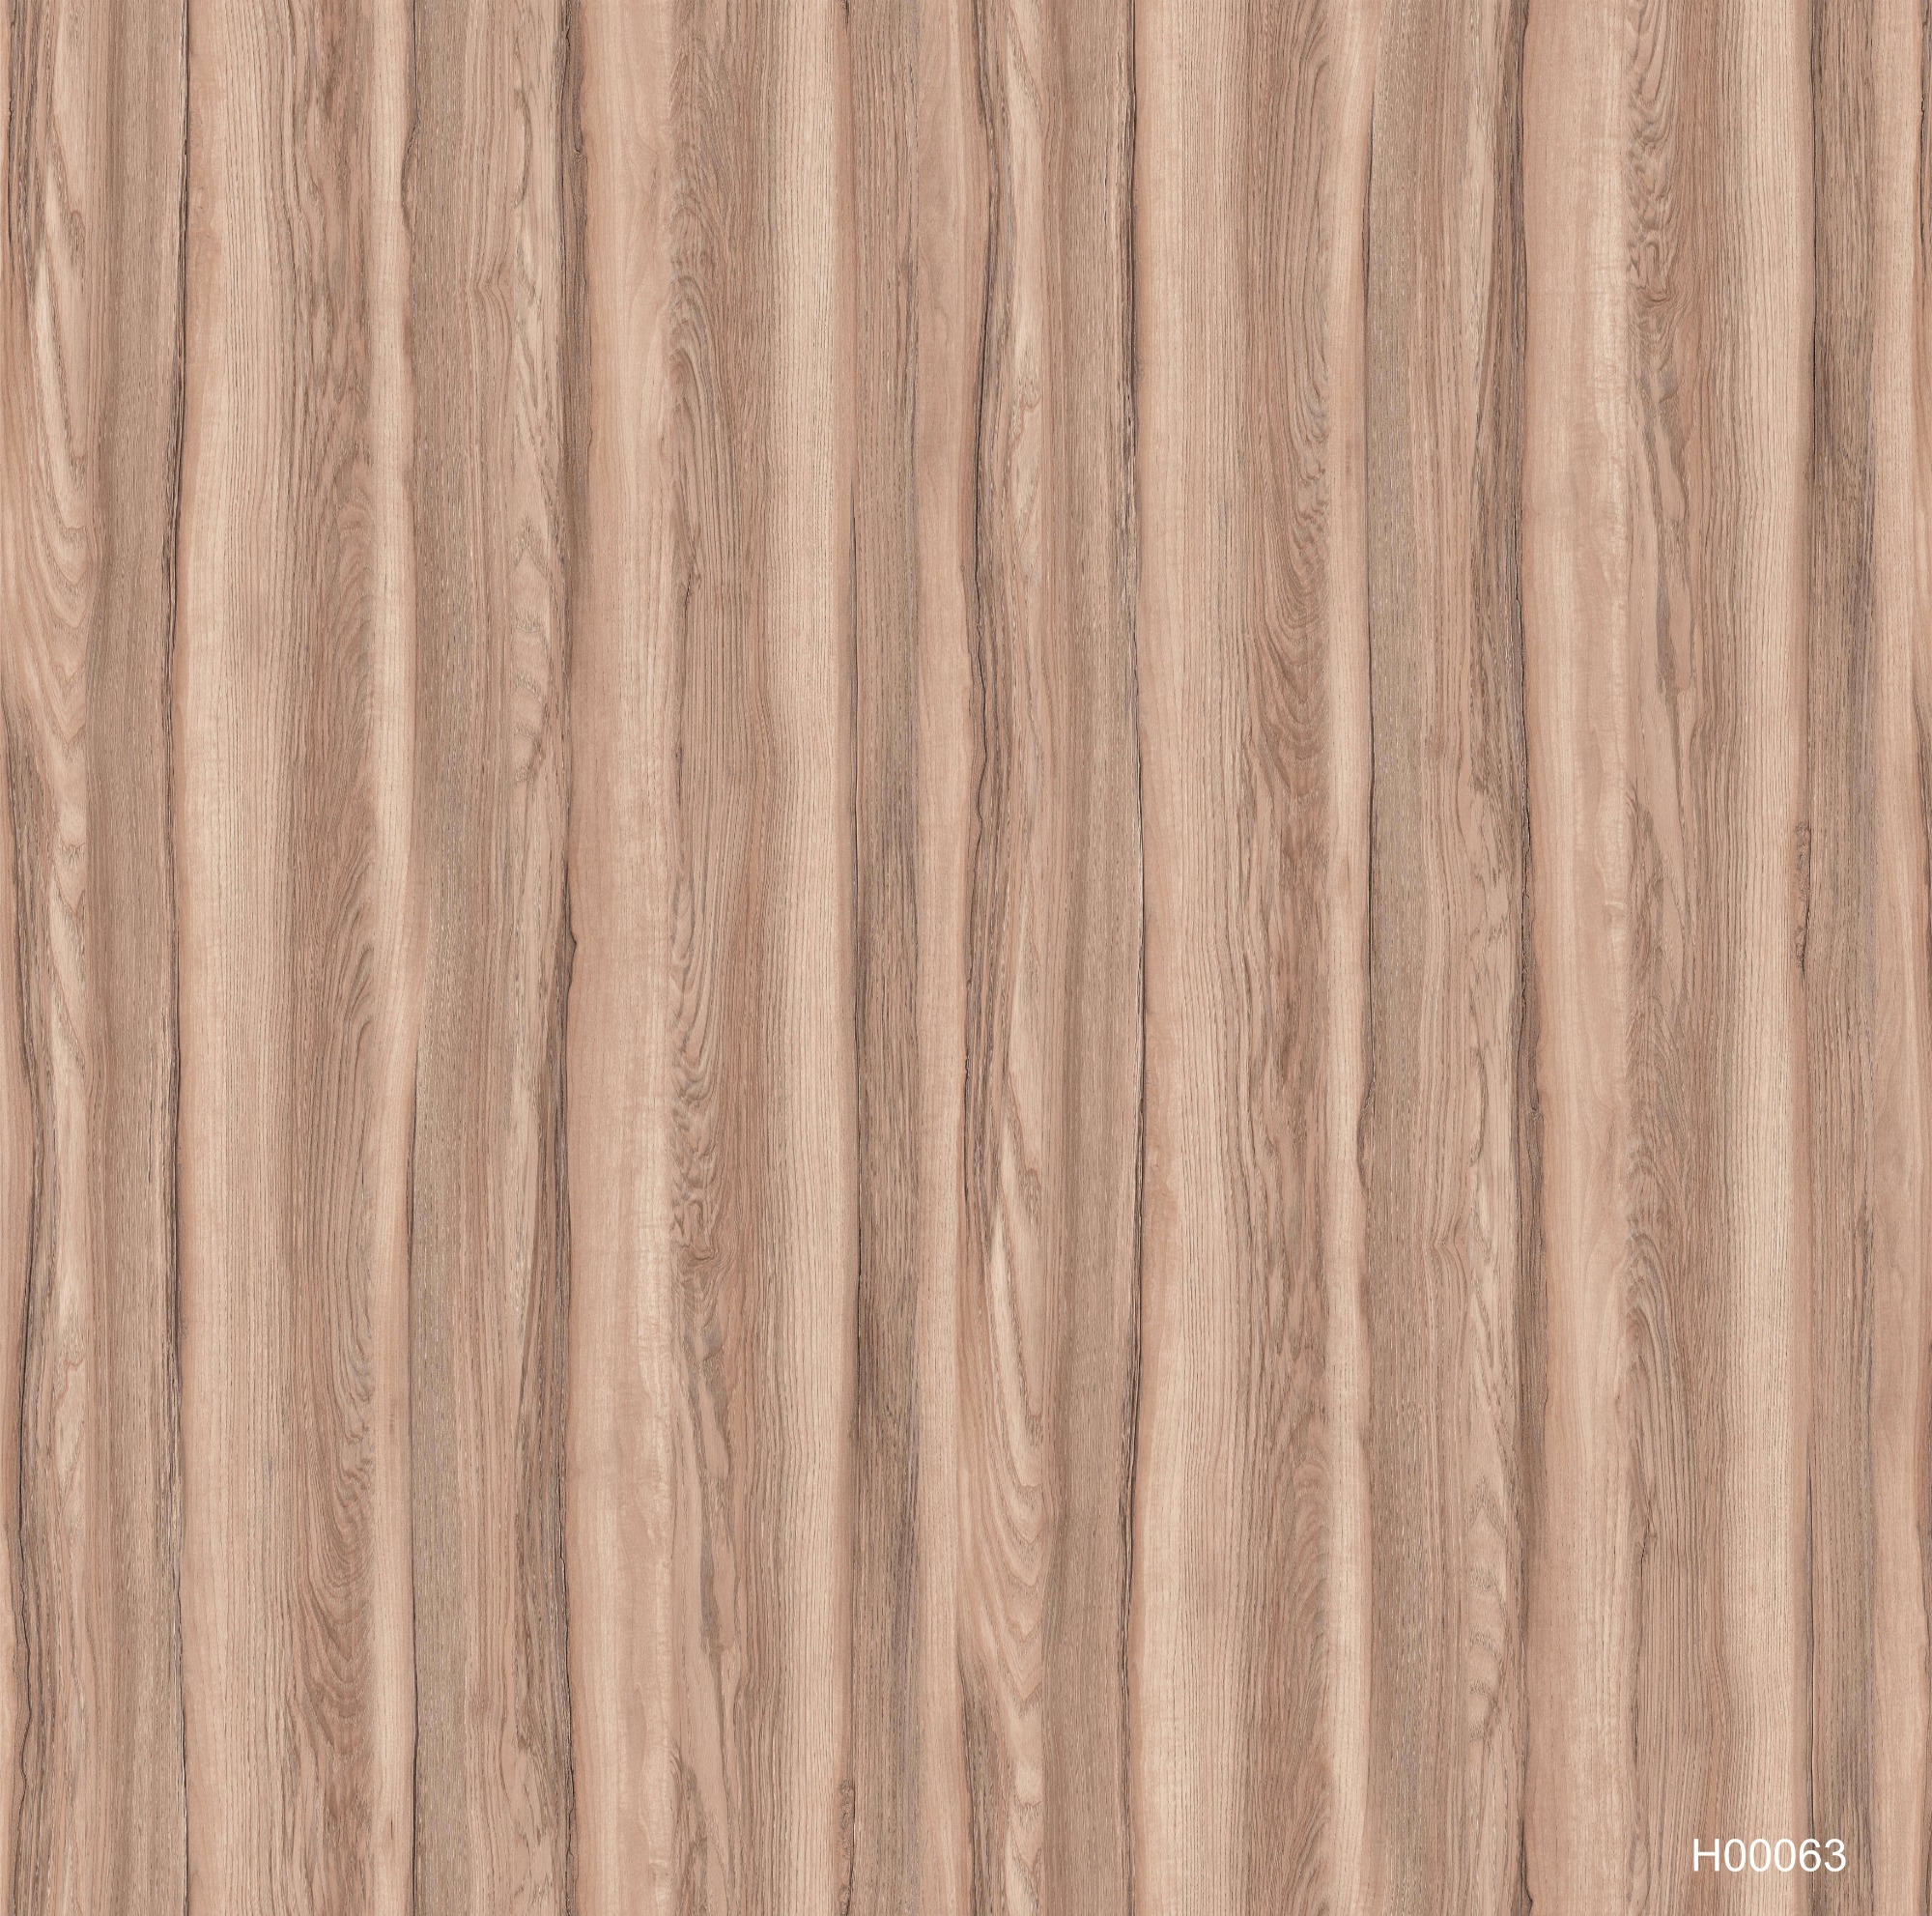 H00063 Melamine paper with wood grain